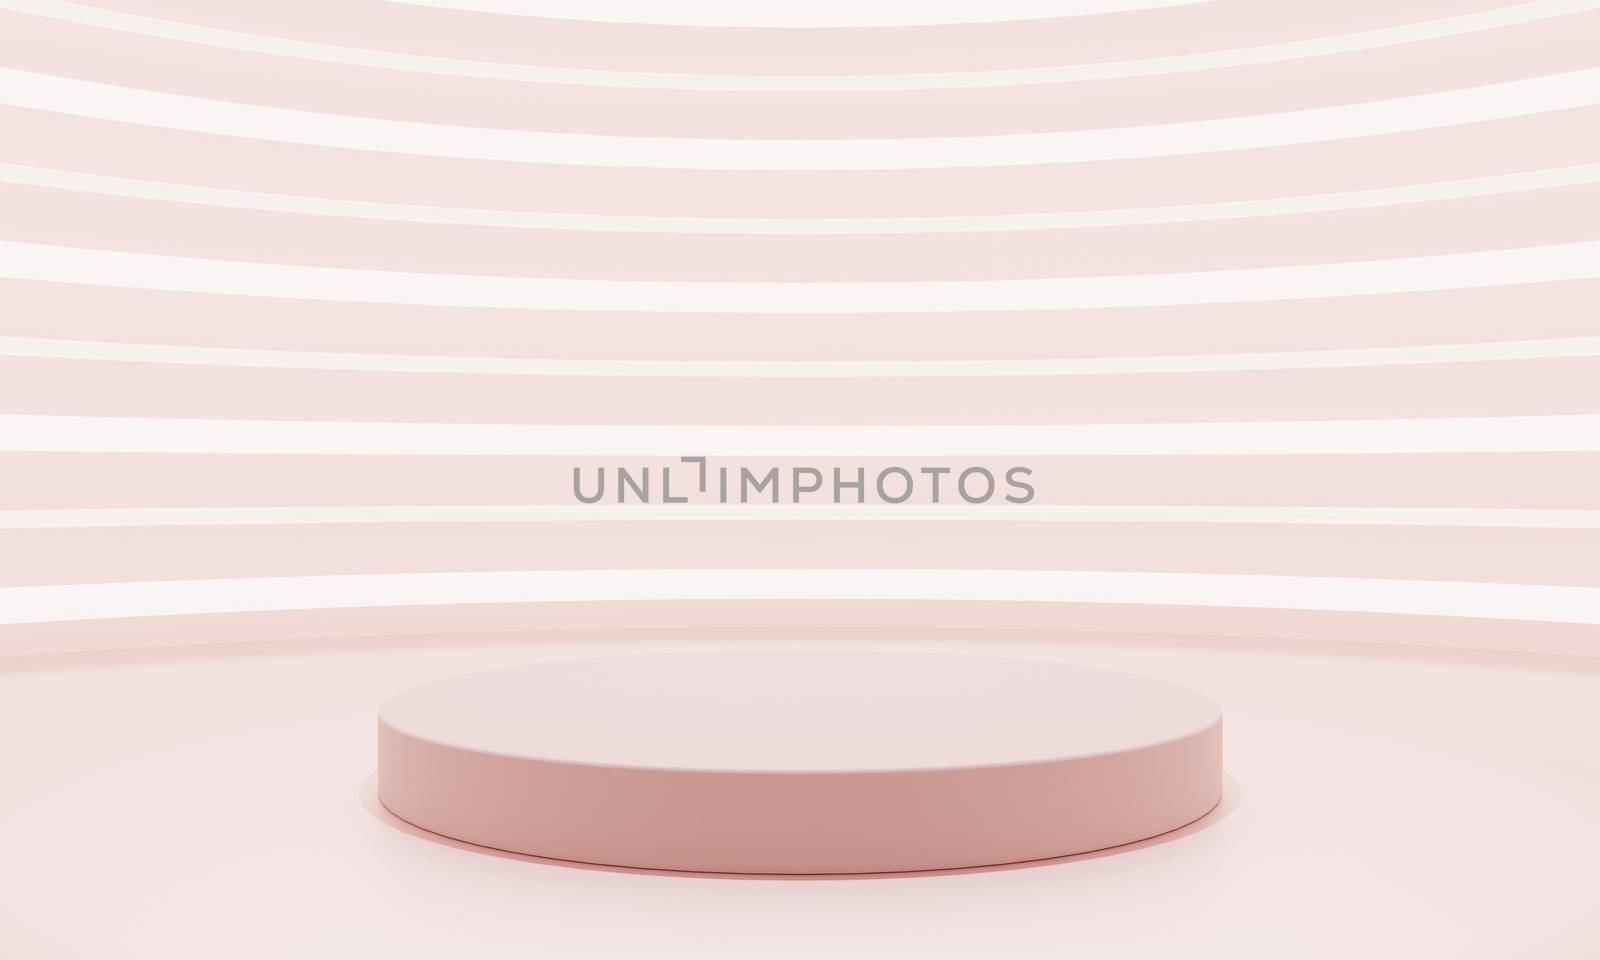 Minimal style curves pink product podium showcase with white and pink neon background. Technology and object concept. 3D illustration rendering by MiniStocker